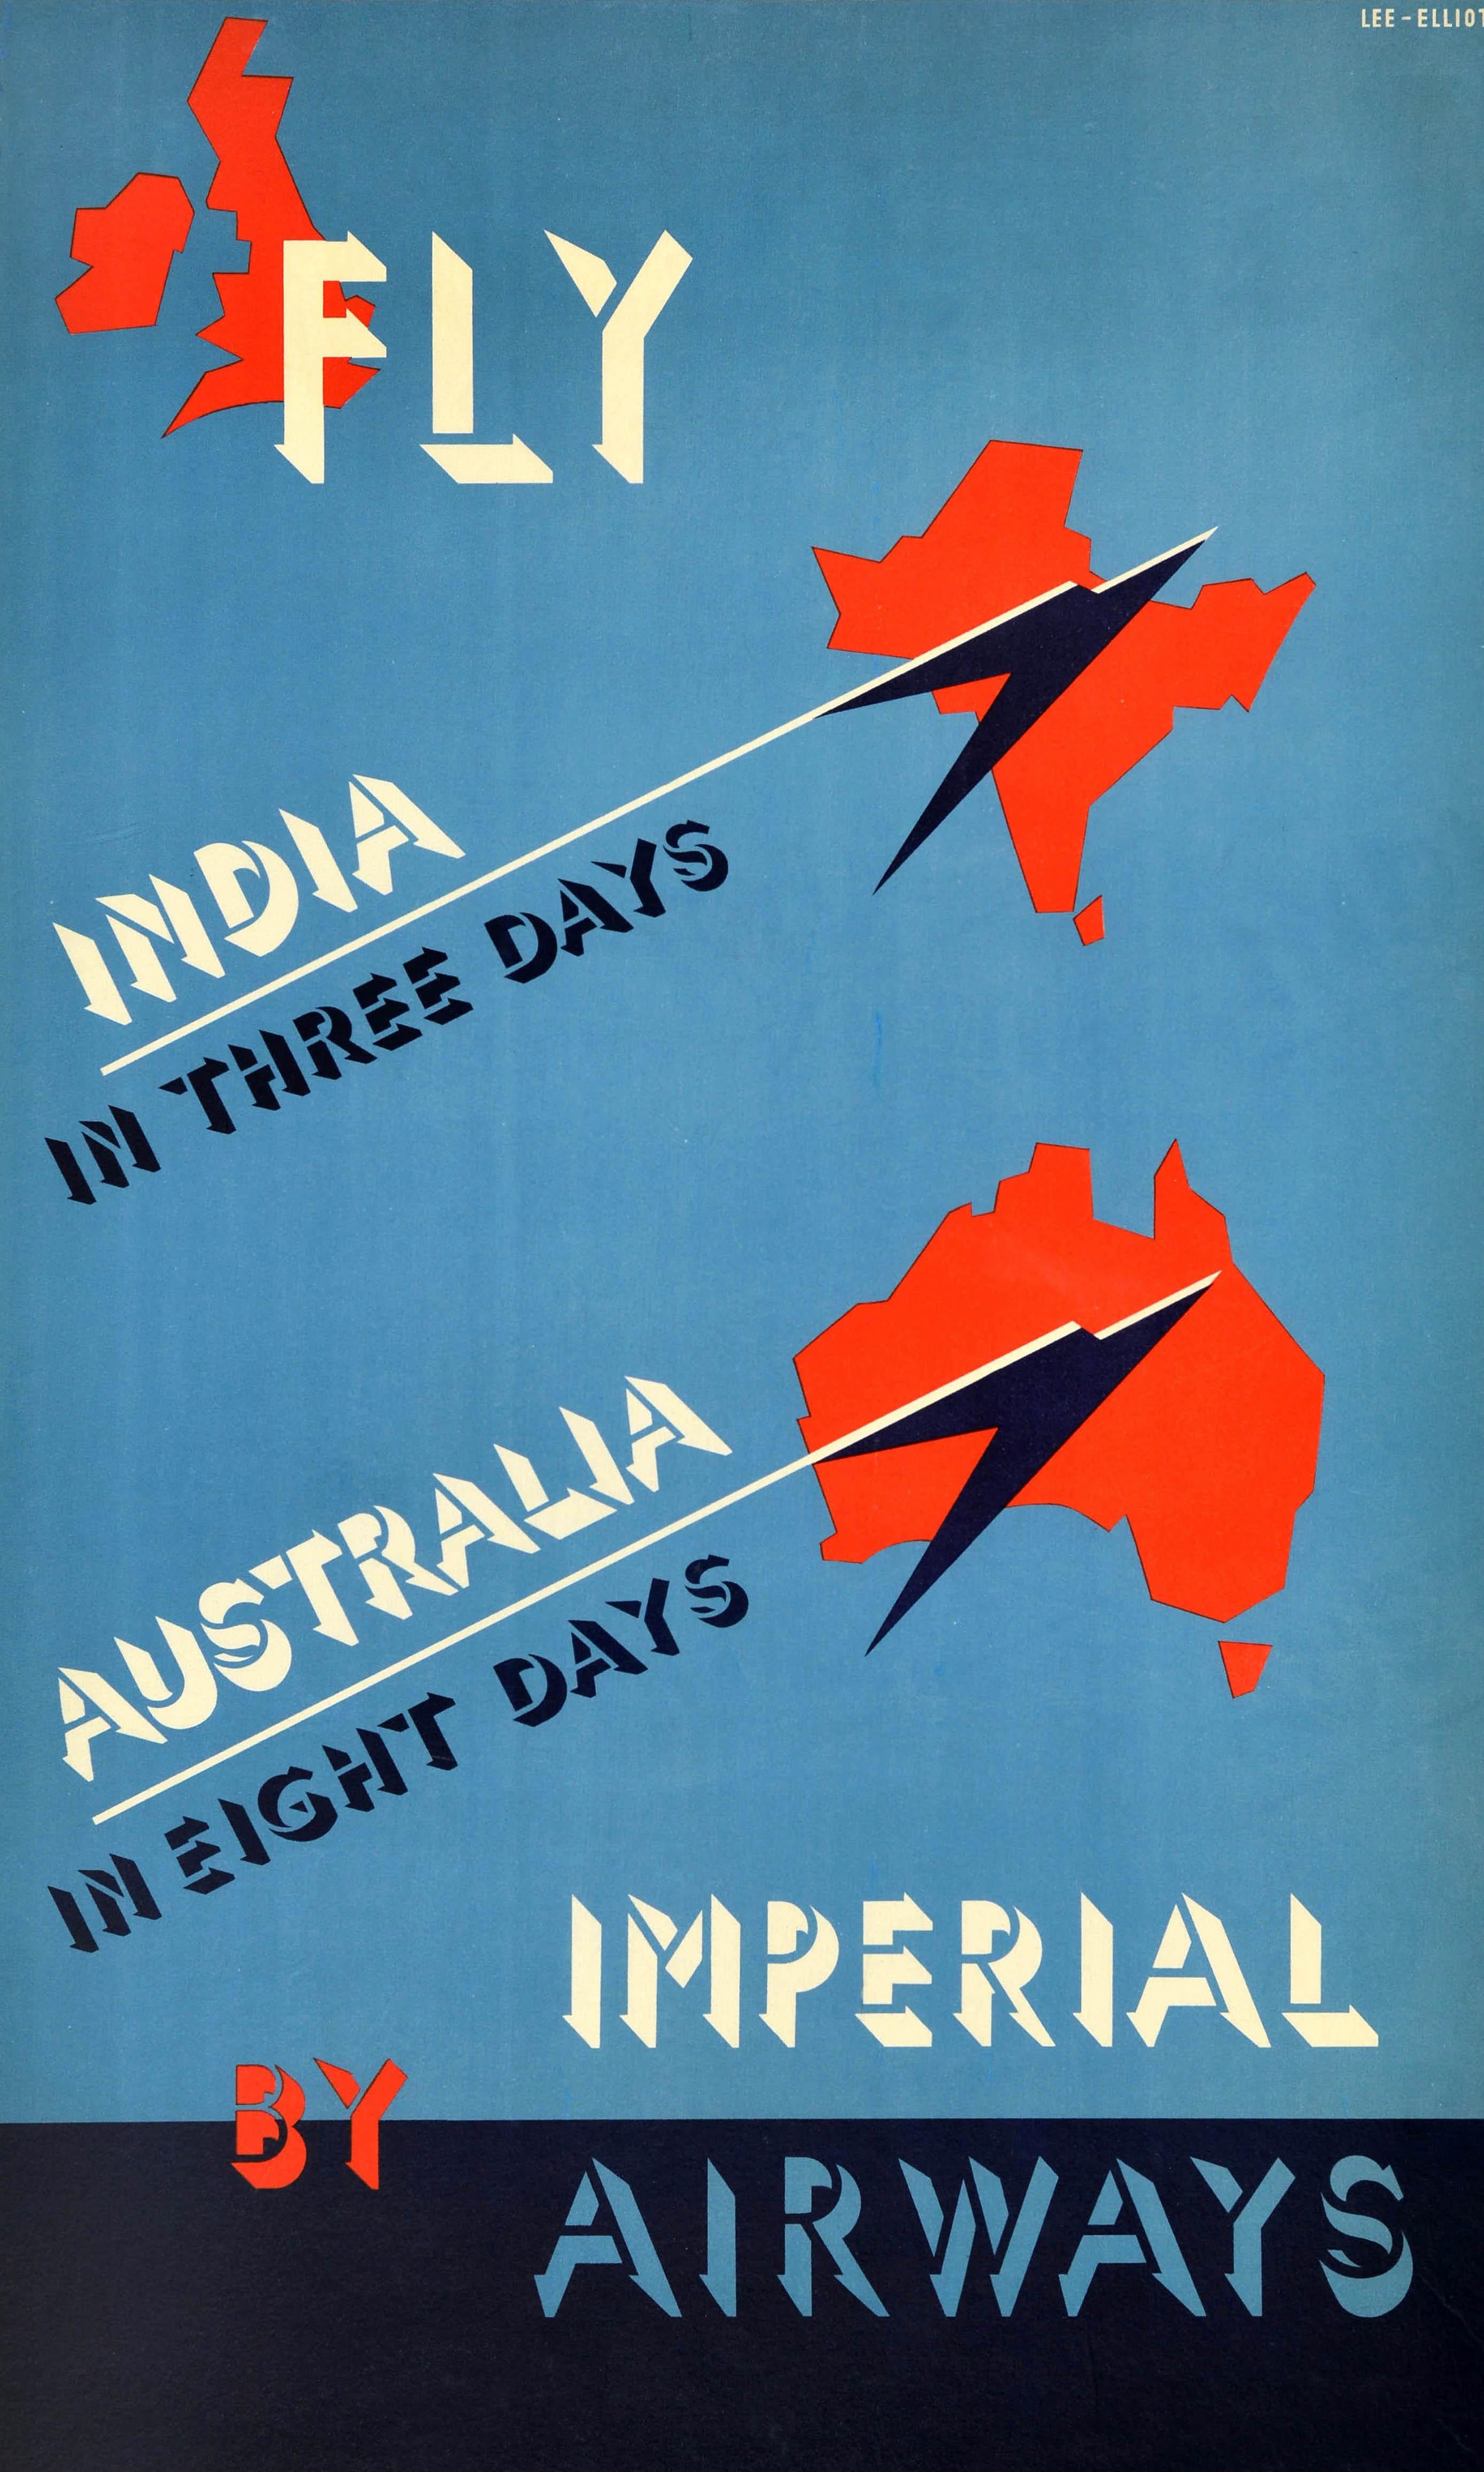 Original vintage travel advertising poster - Fly by Imperial Airways India in three days Australia in eight days - featuring the stylised bold text over red map shapes of the UK and Ireland at the top with the destination text diagonally on lines